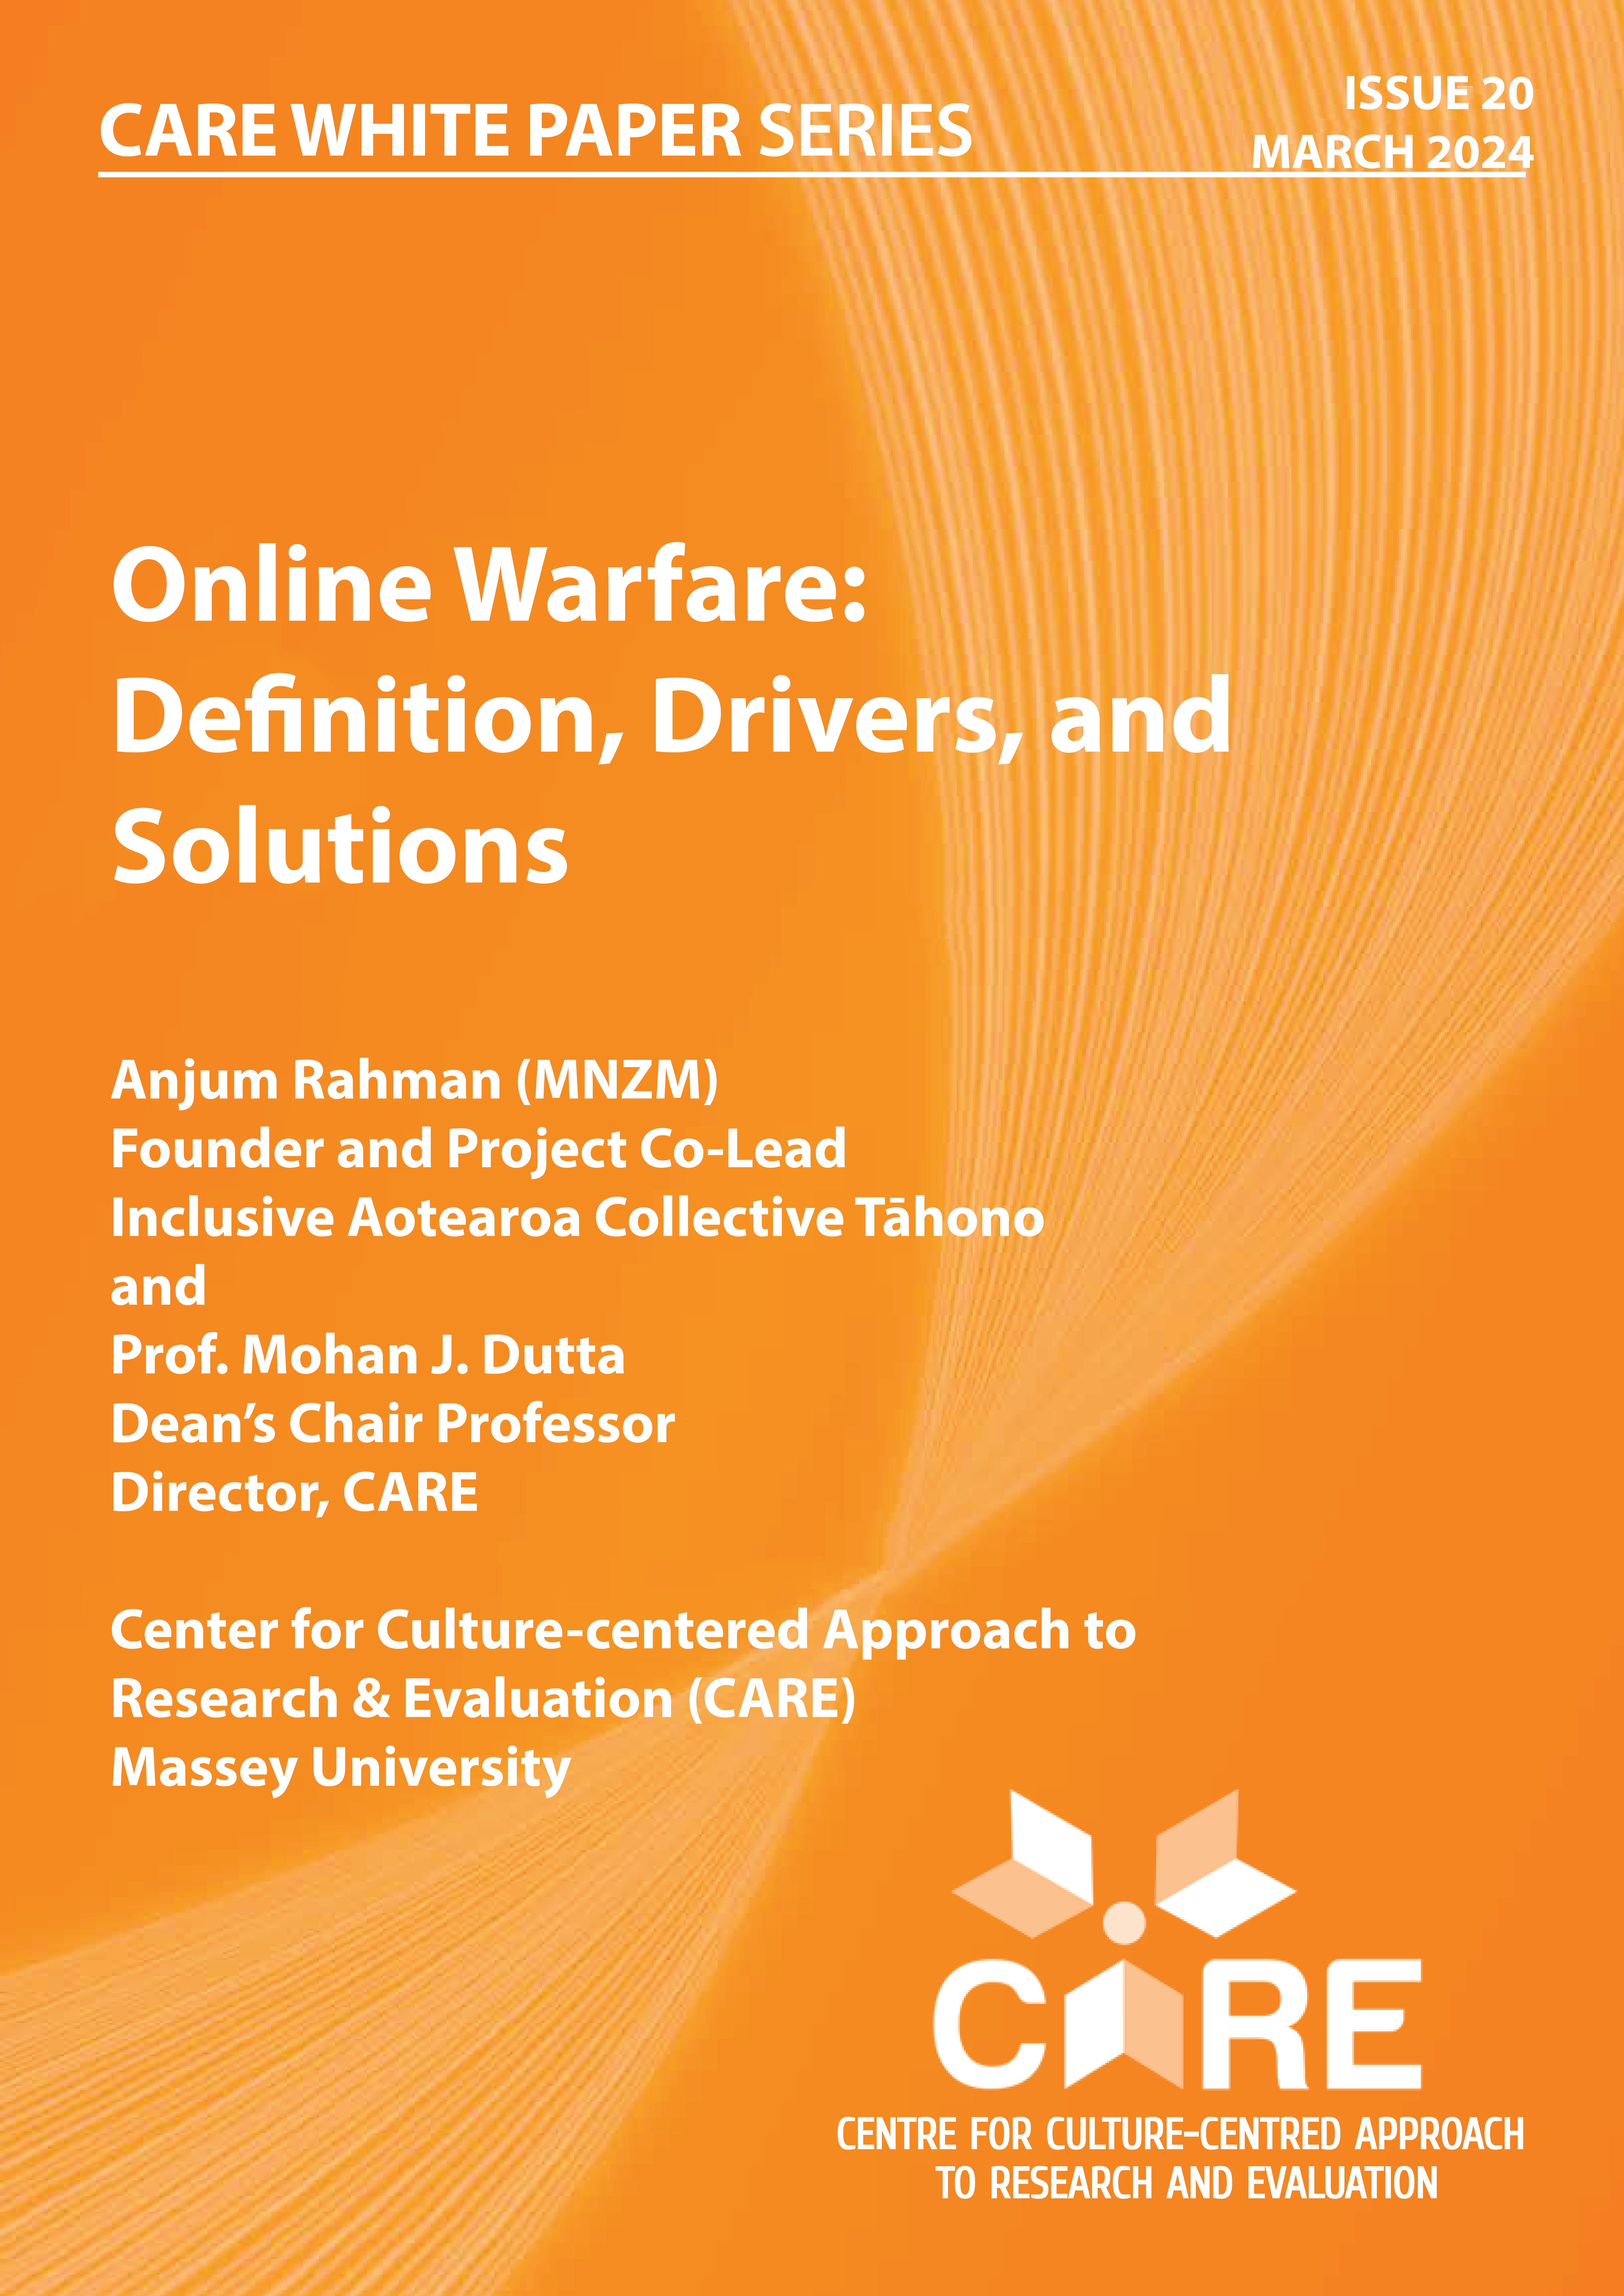 Online Warfare: Definition, Drivers and Solutions by Anjum Rahman